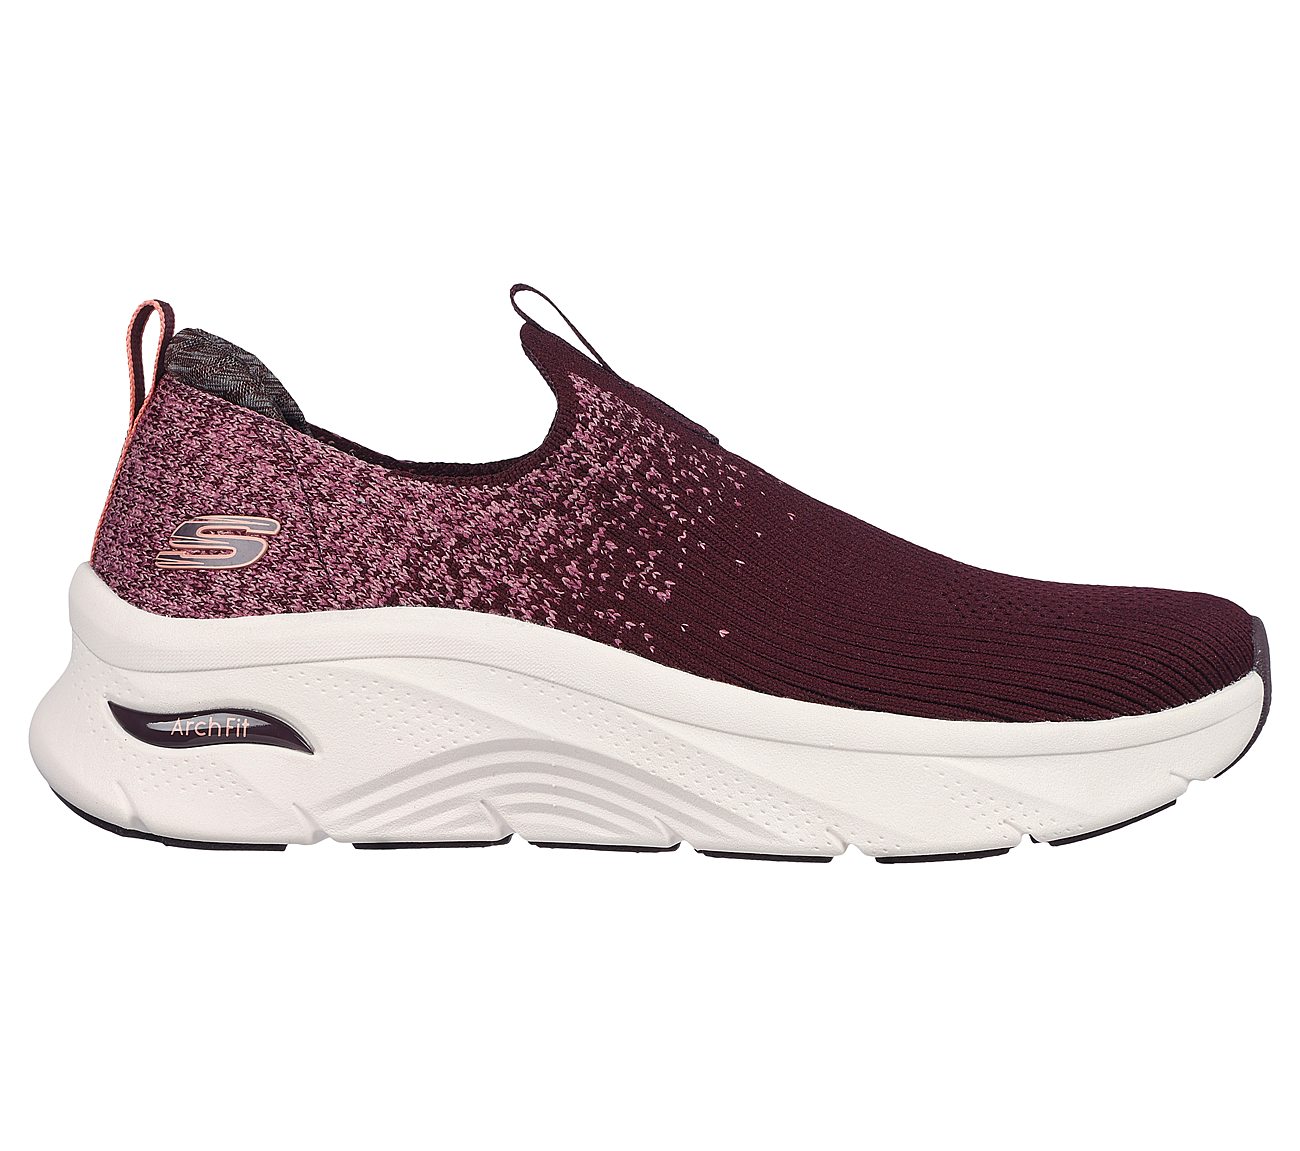 ARCH FIT D'LUX-JOURNEY, BBURGUNDY Footwear Lateral View